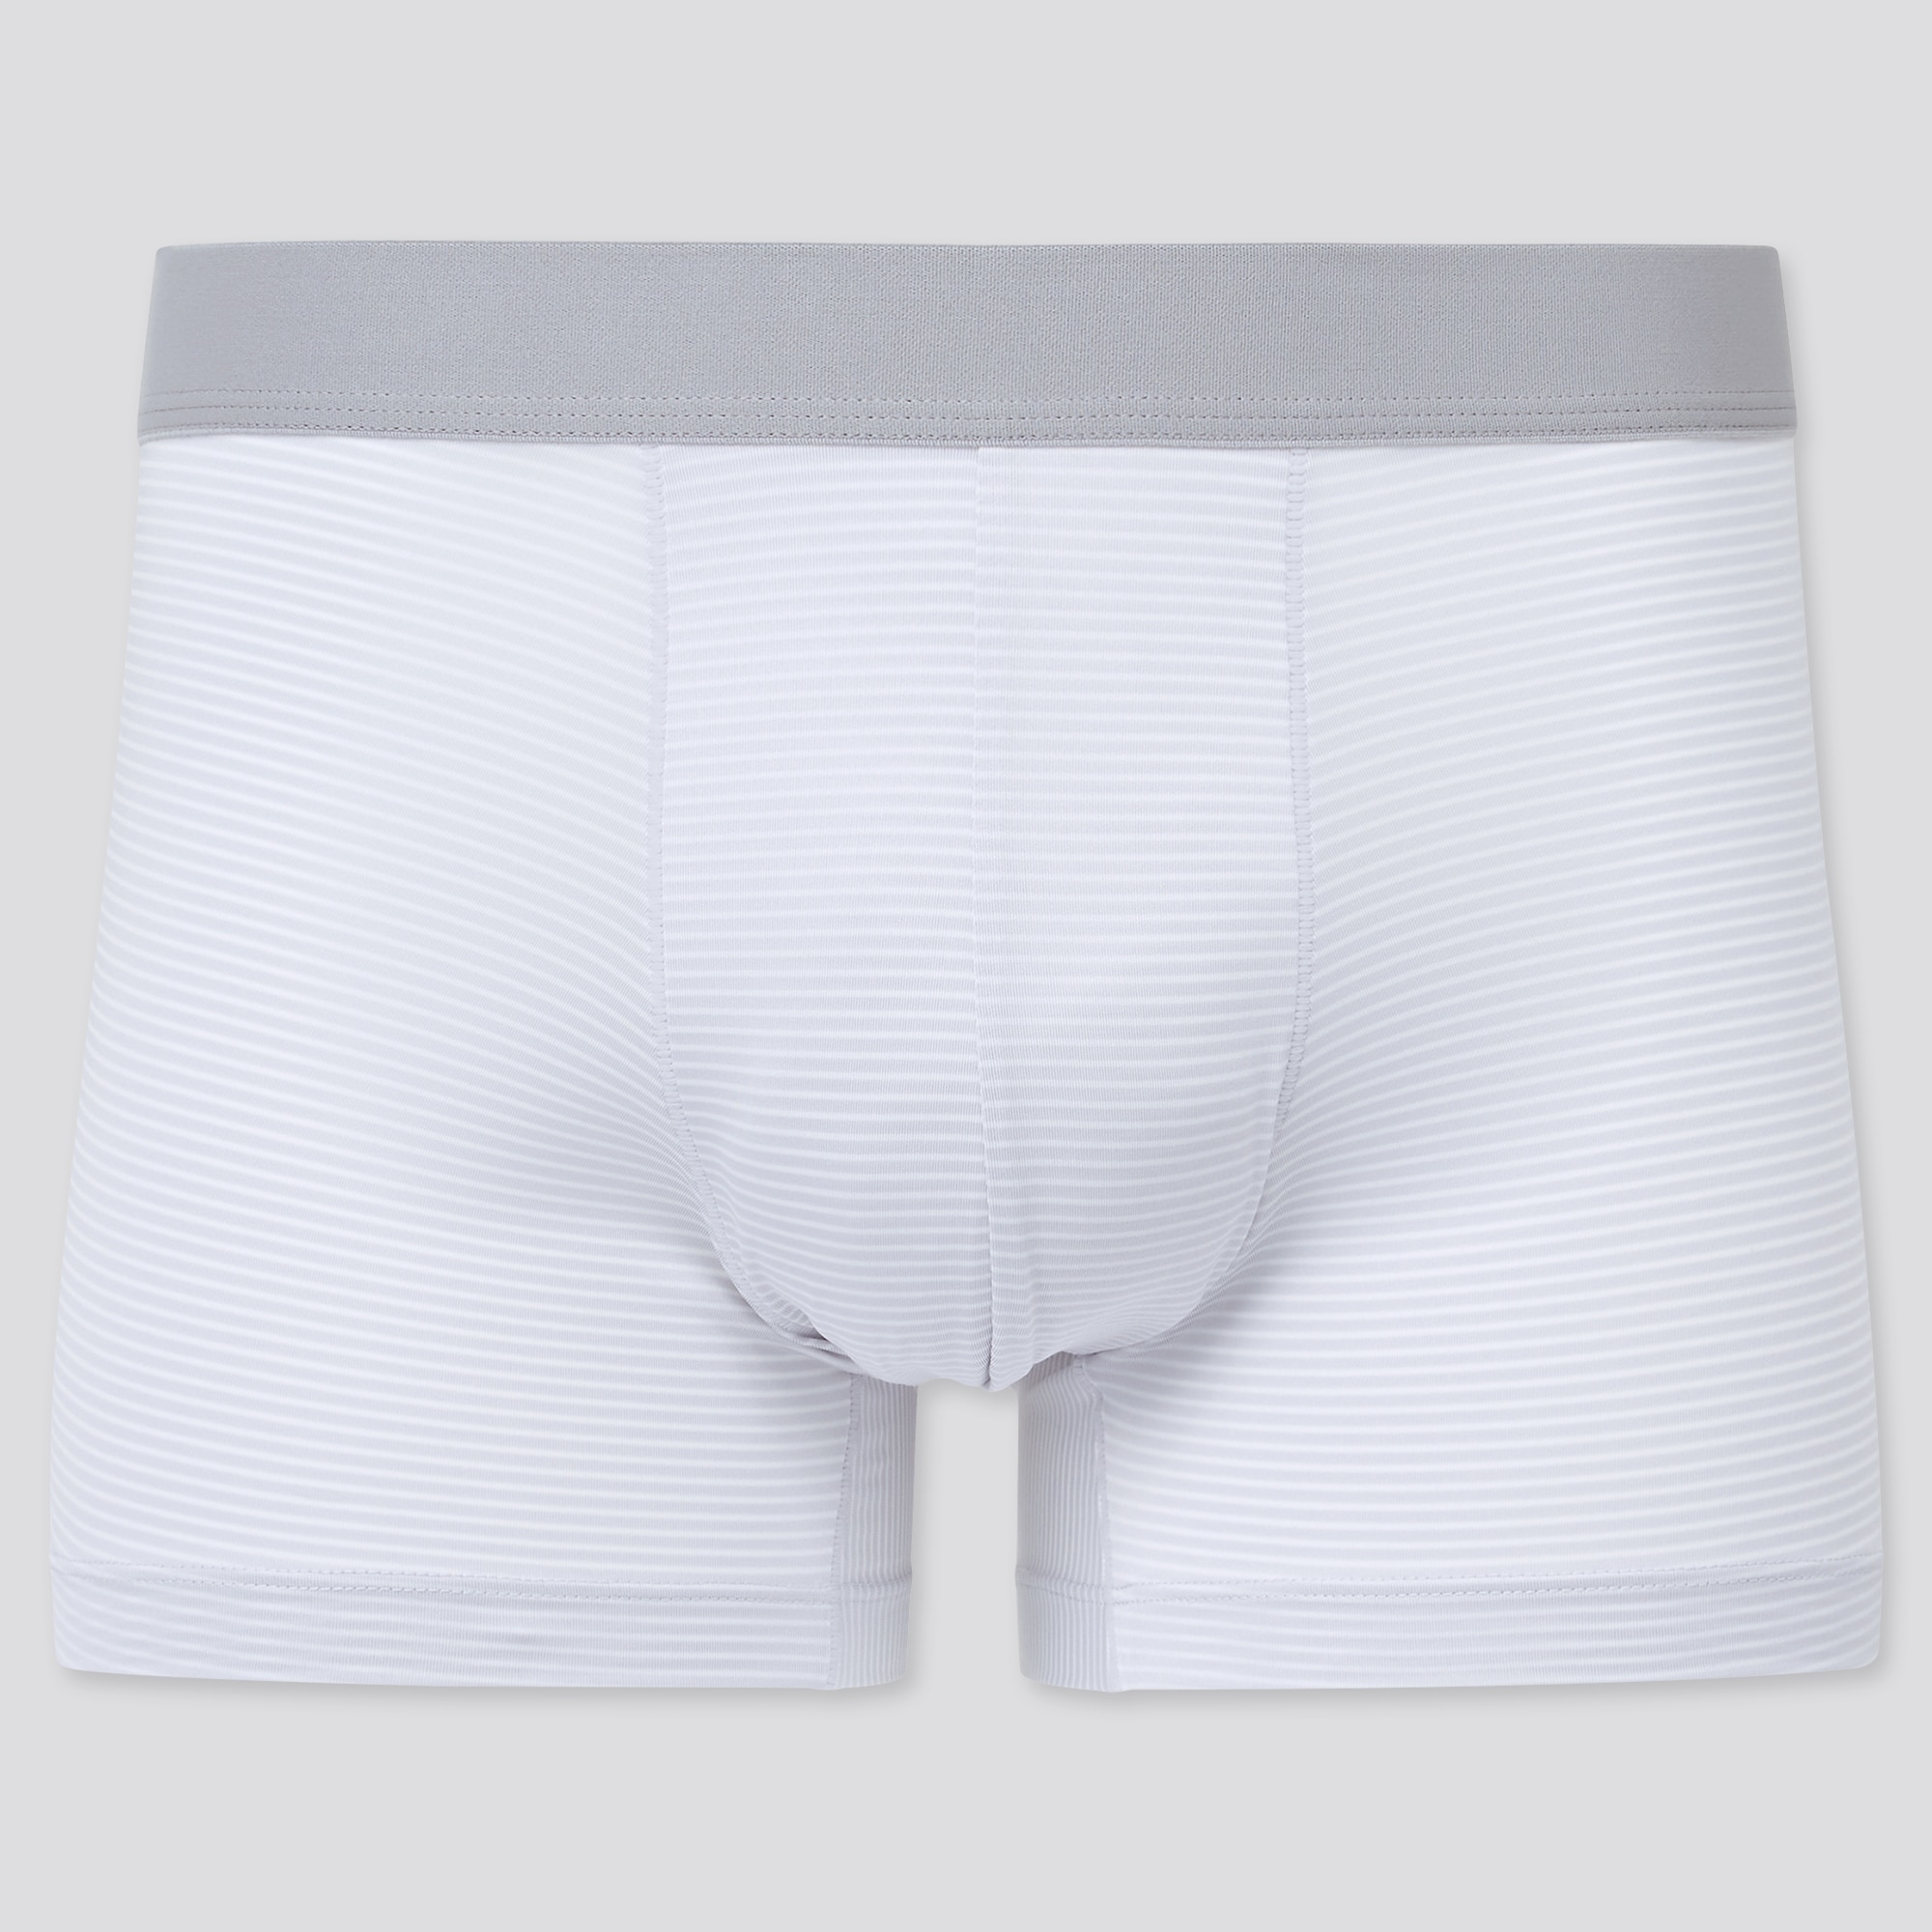 Uniqlo Airism Low Rise Boxer Briefs, Men's Fashion, Bottoms, New Underwear  on Carousell